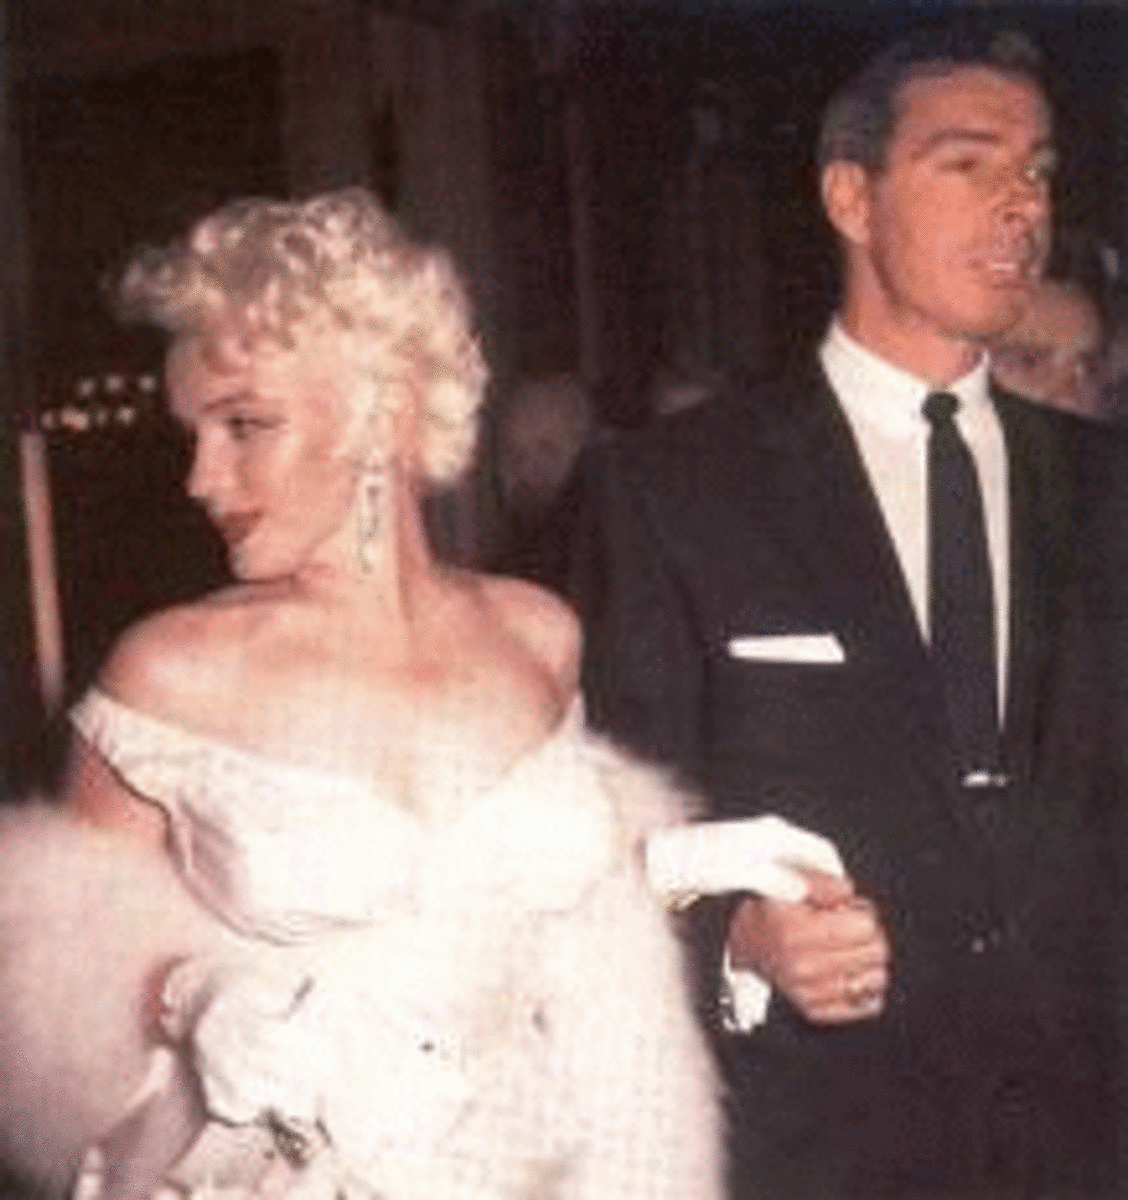 Joe DiMaggio and Marilyn, he never stopped loving her.